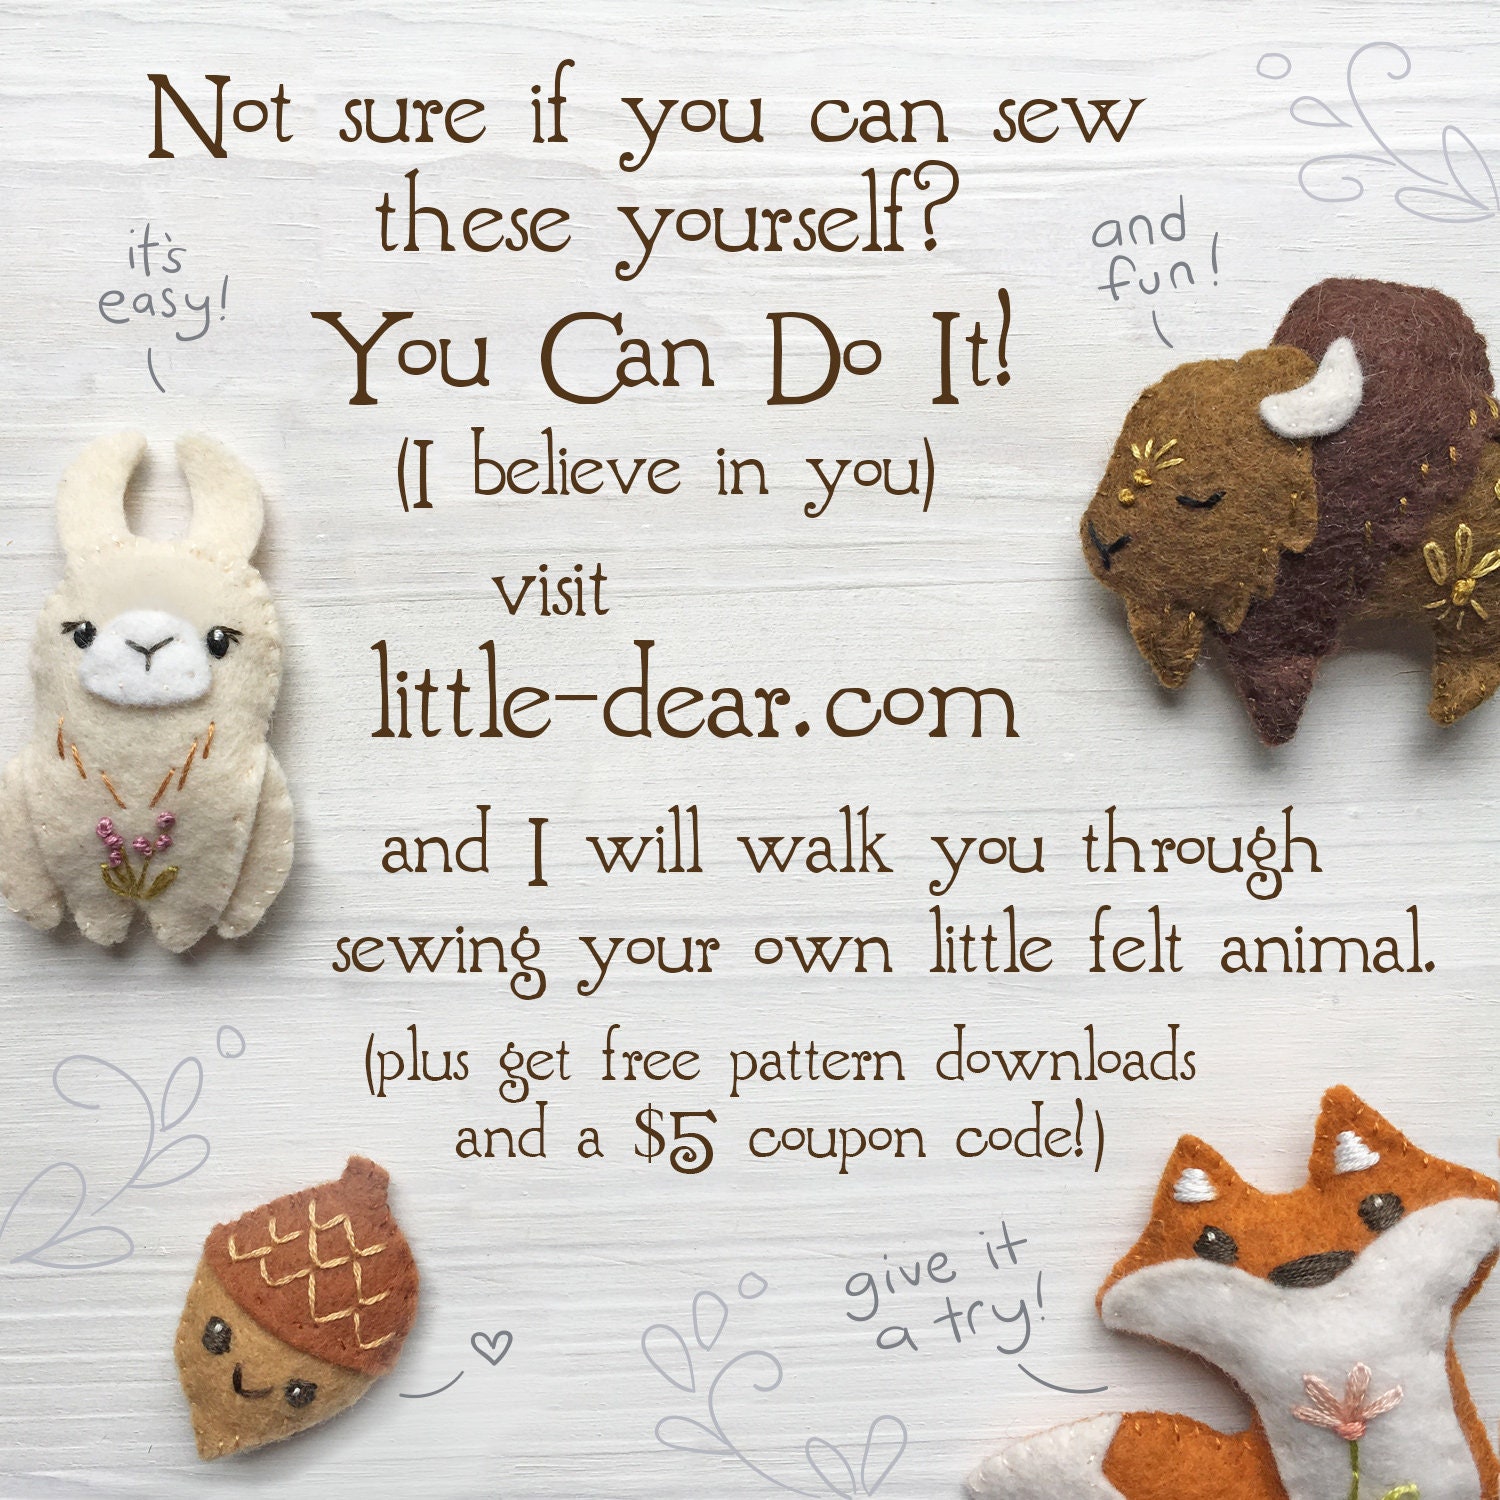 How To Sew Felt Animals: 27 Ideas For Toys, Gifts & More! - Sewist's Lab